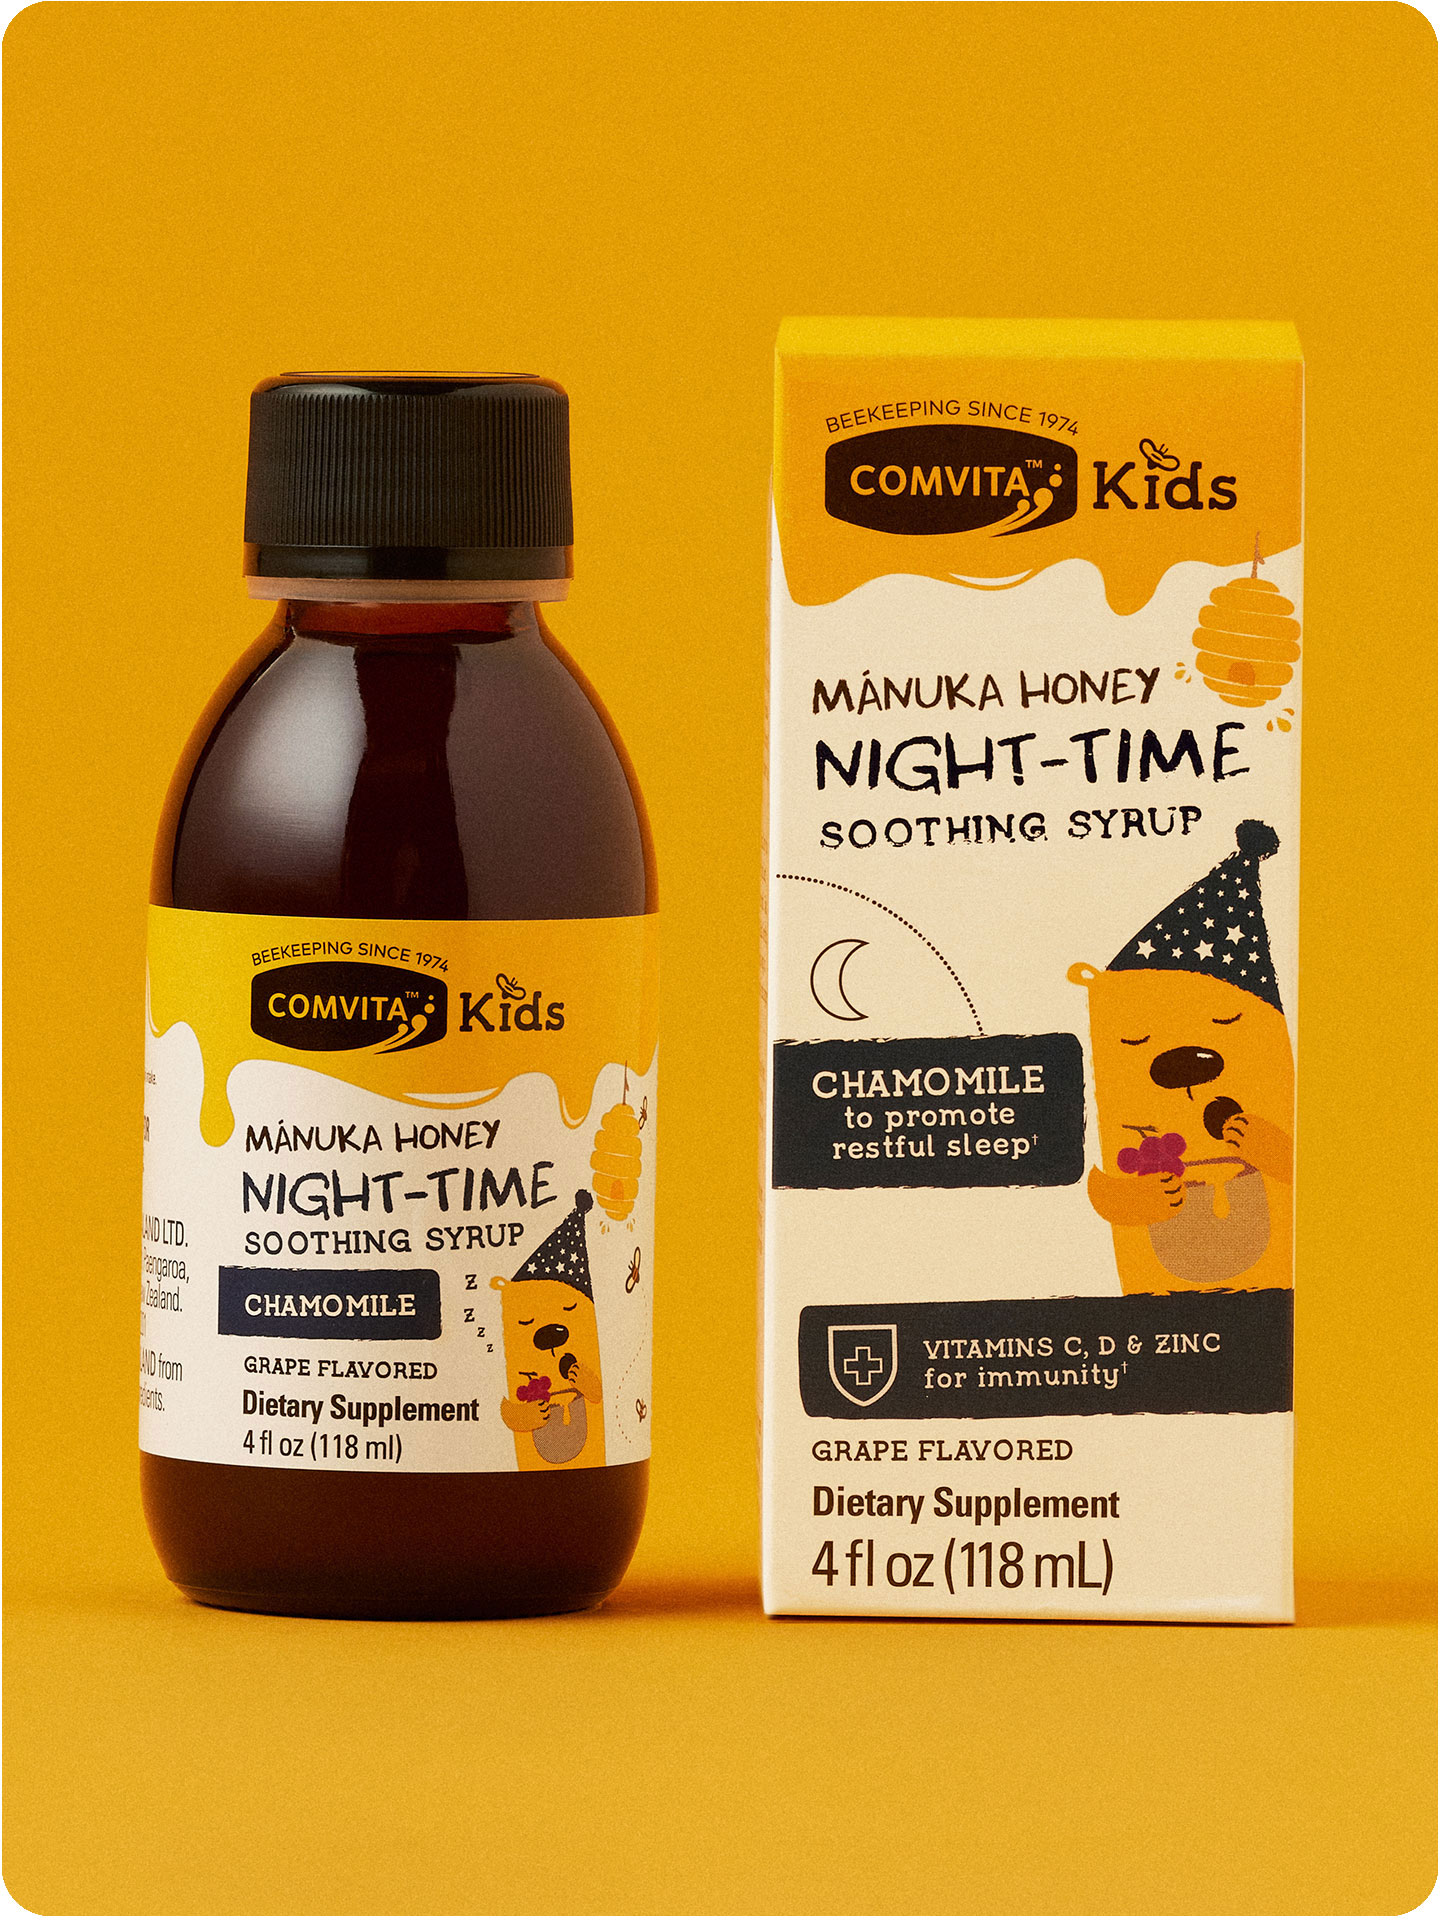 Kids Night-Time Soothing Syrup box & bottle